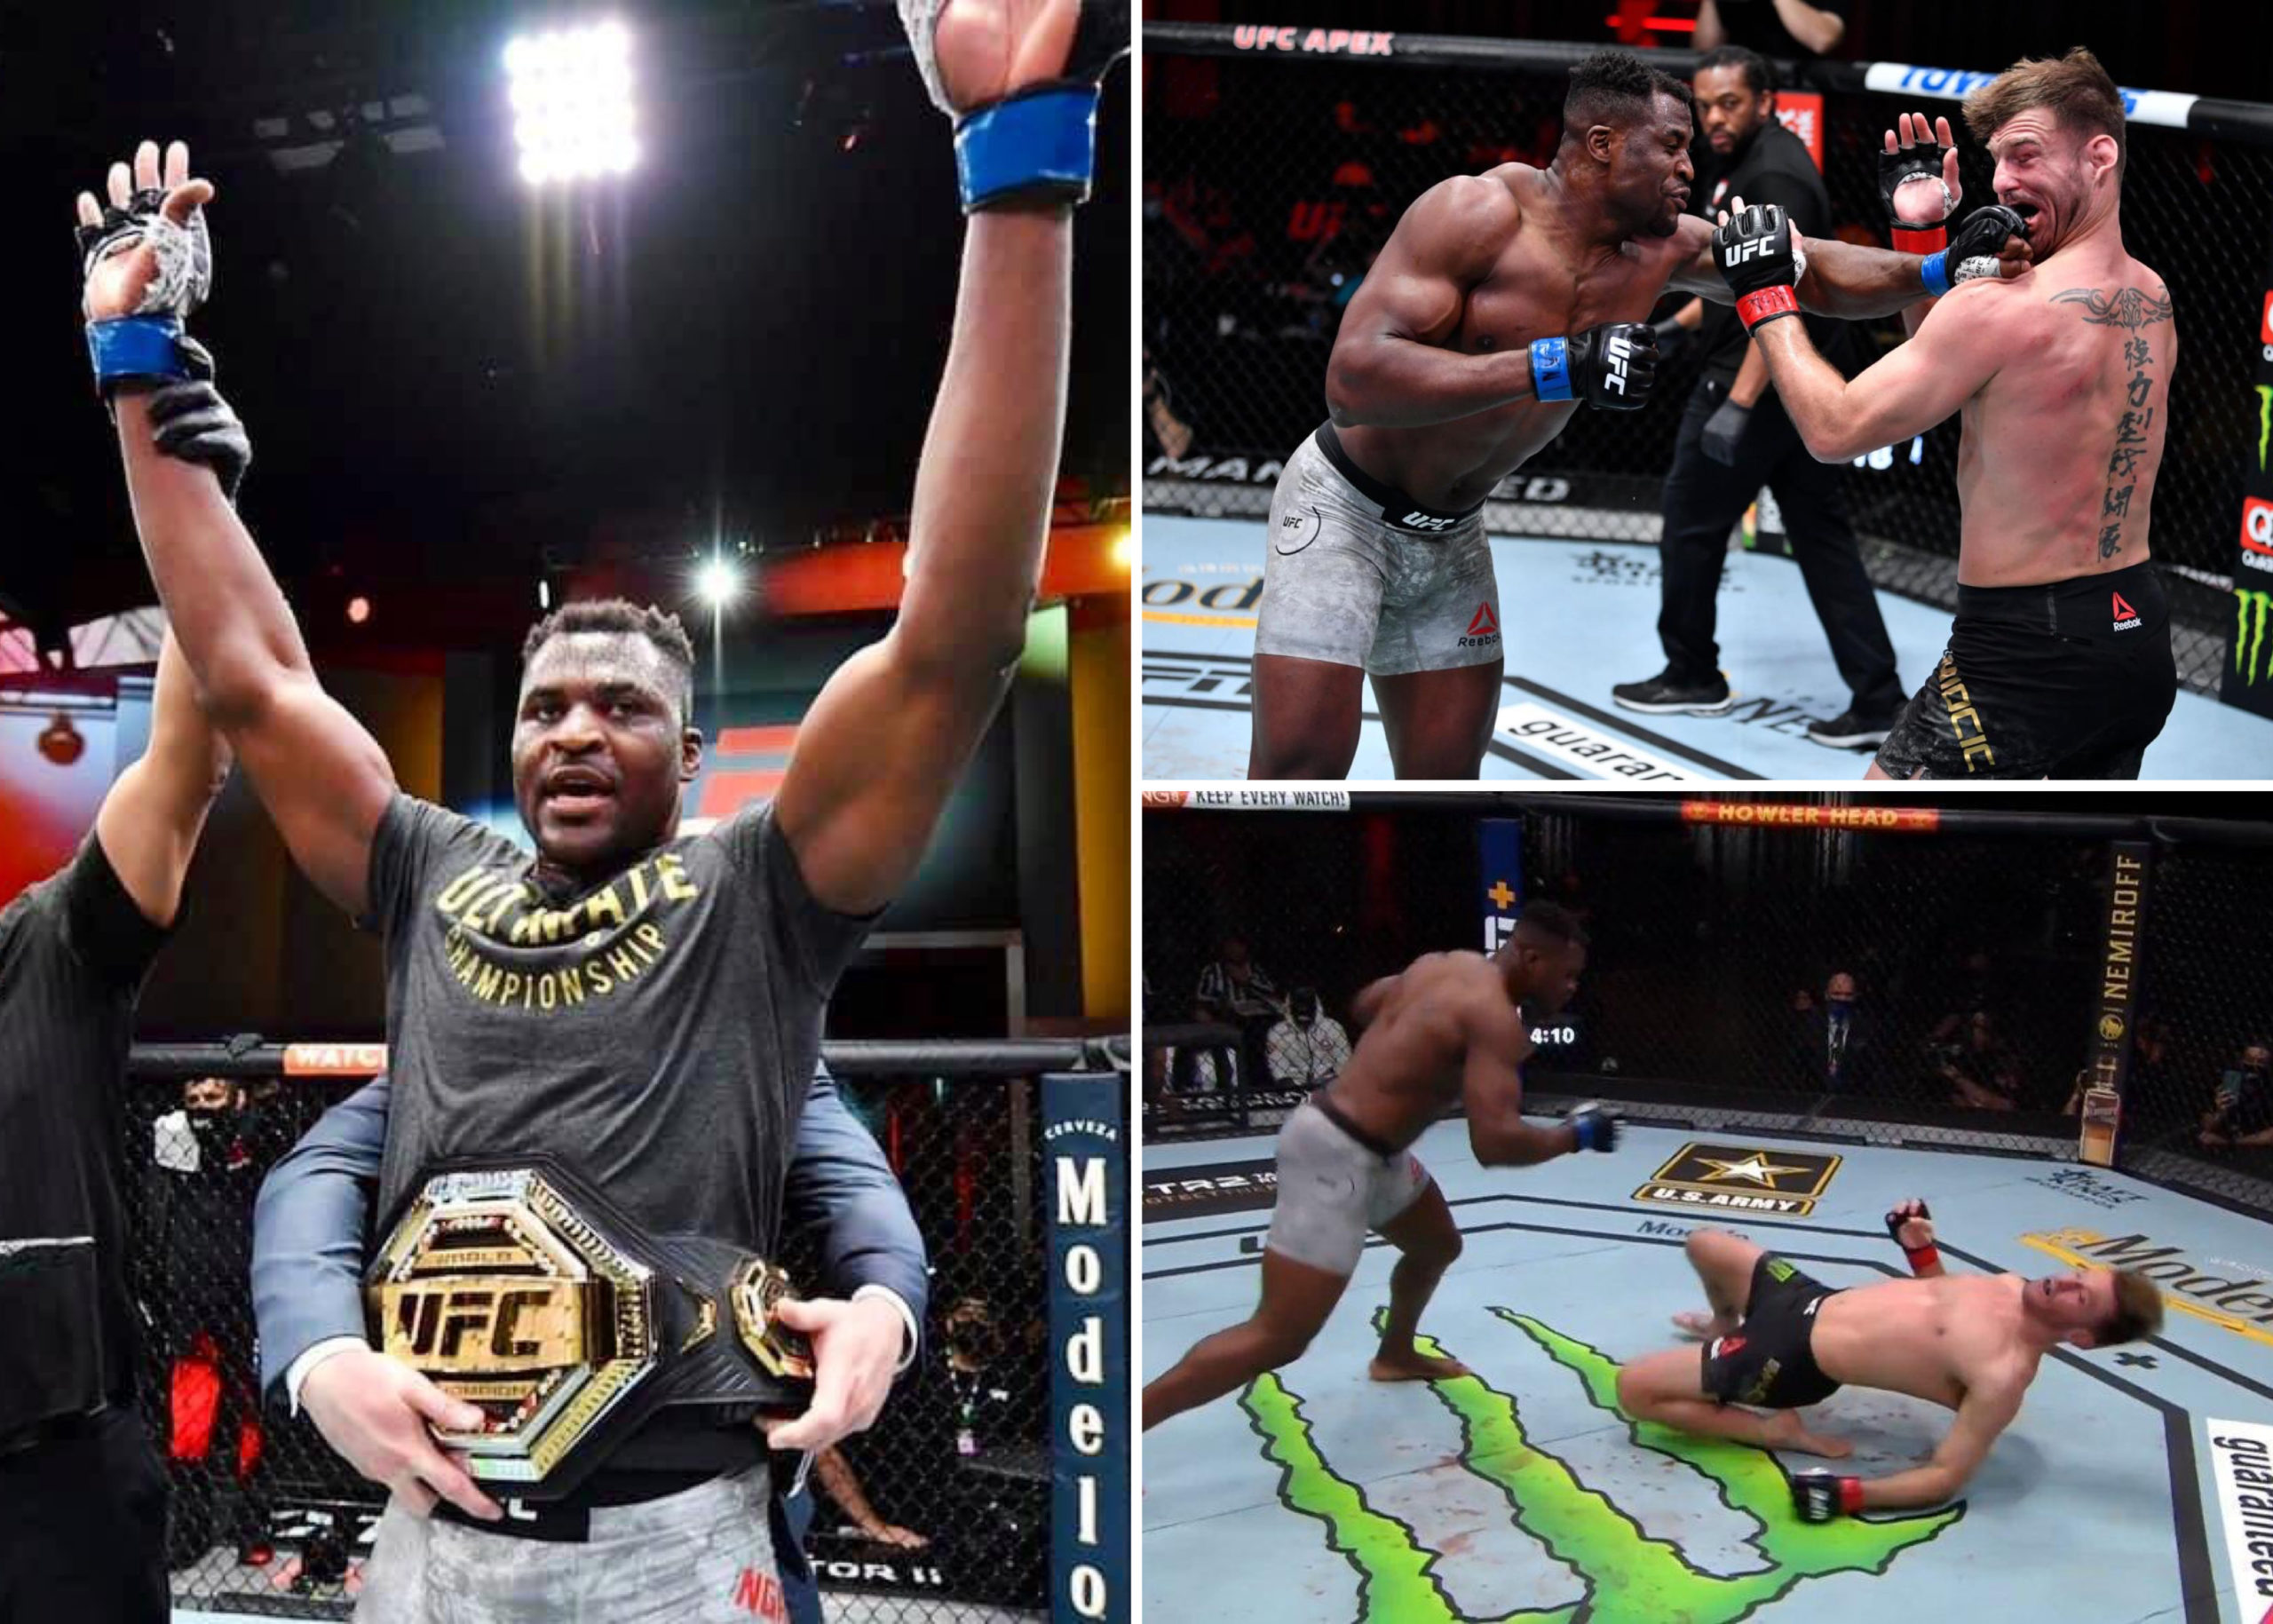 UFC 260: Francis Ngannou Knock Out Stipe Miocic To Become New UFC Heavyweight Champion